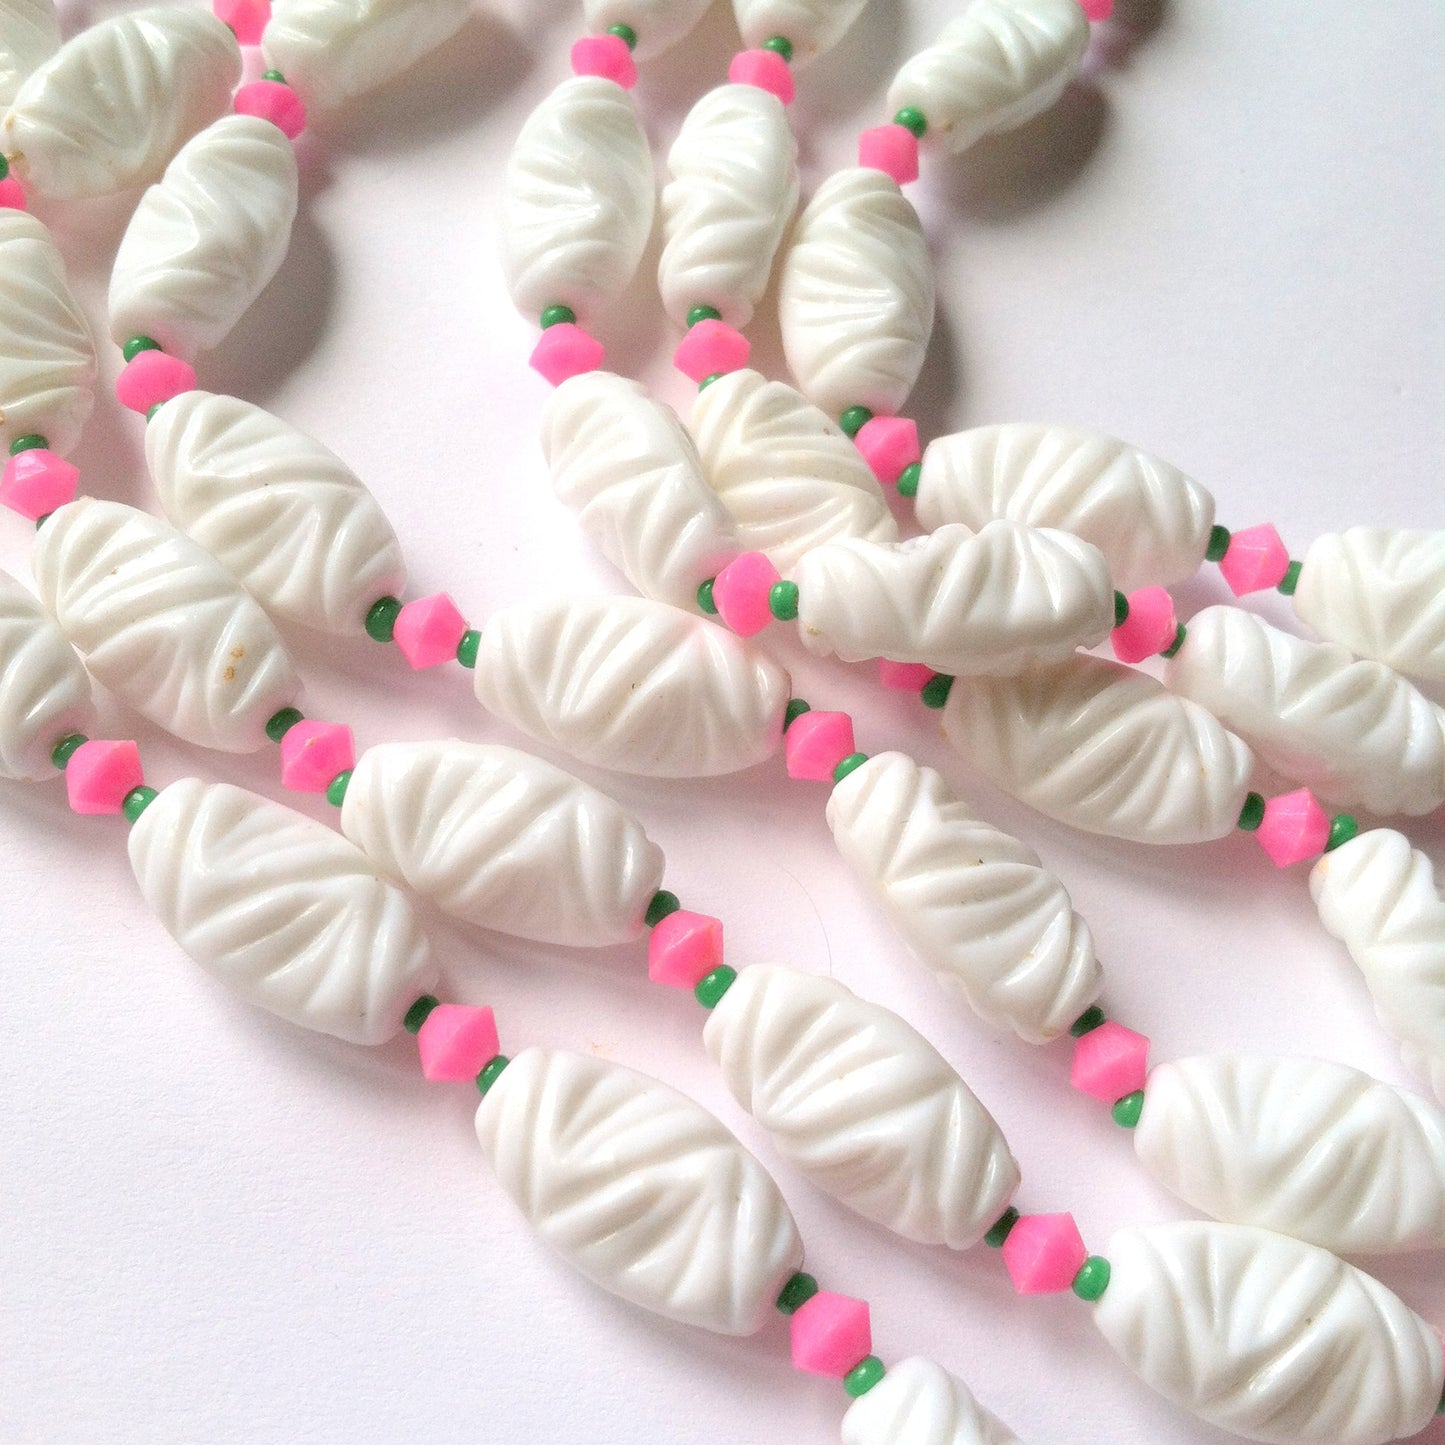 White Carved Bead Necklace w/ Pink Flowers circa 1960s